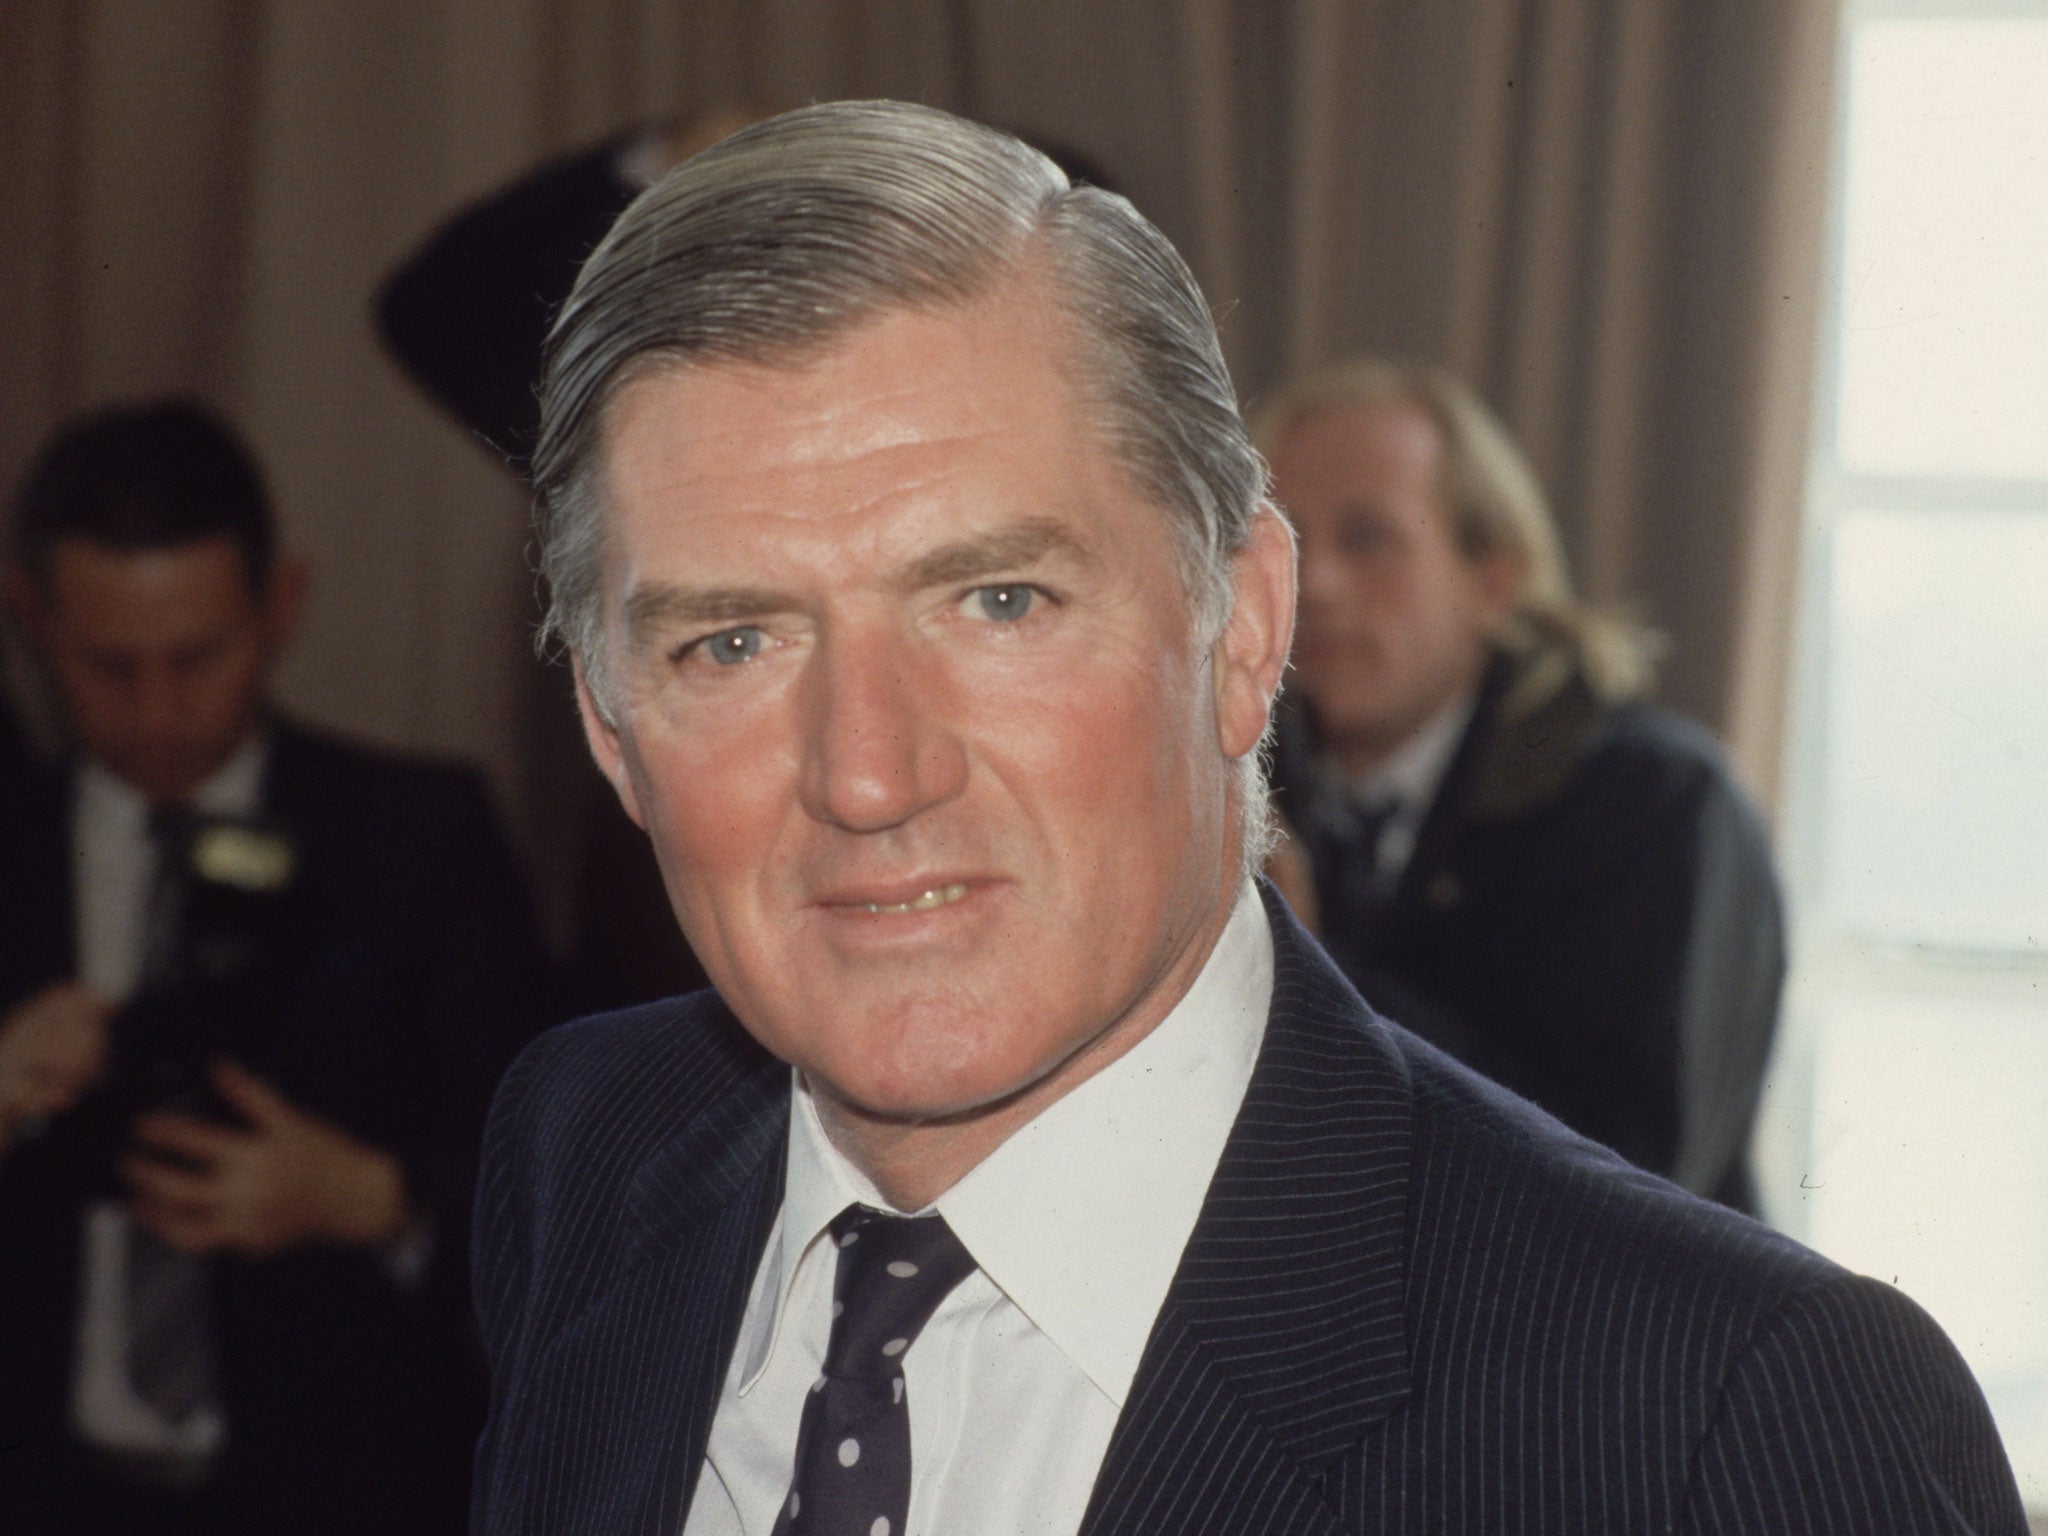 Lord Parkinson was made a life peer after leaving the Commons in 1992